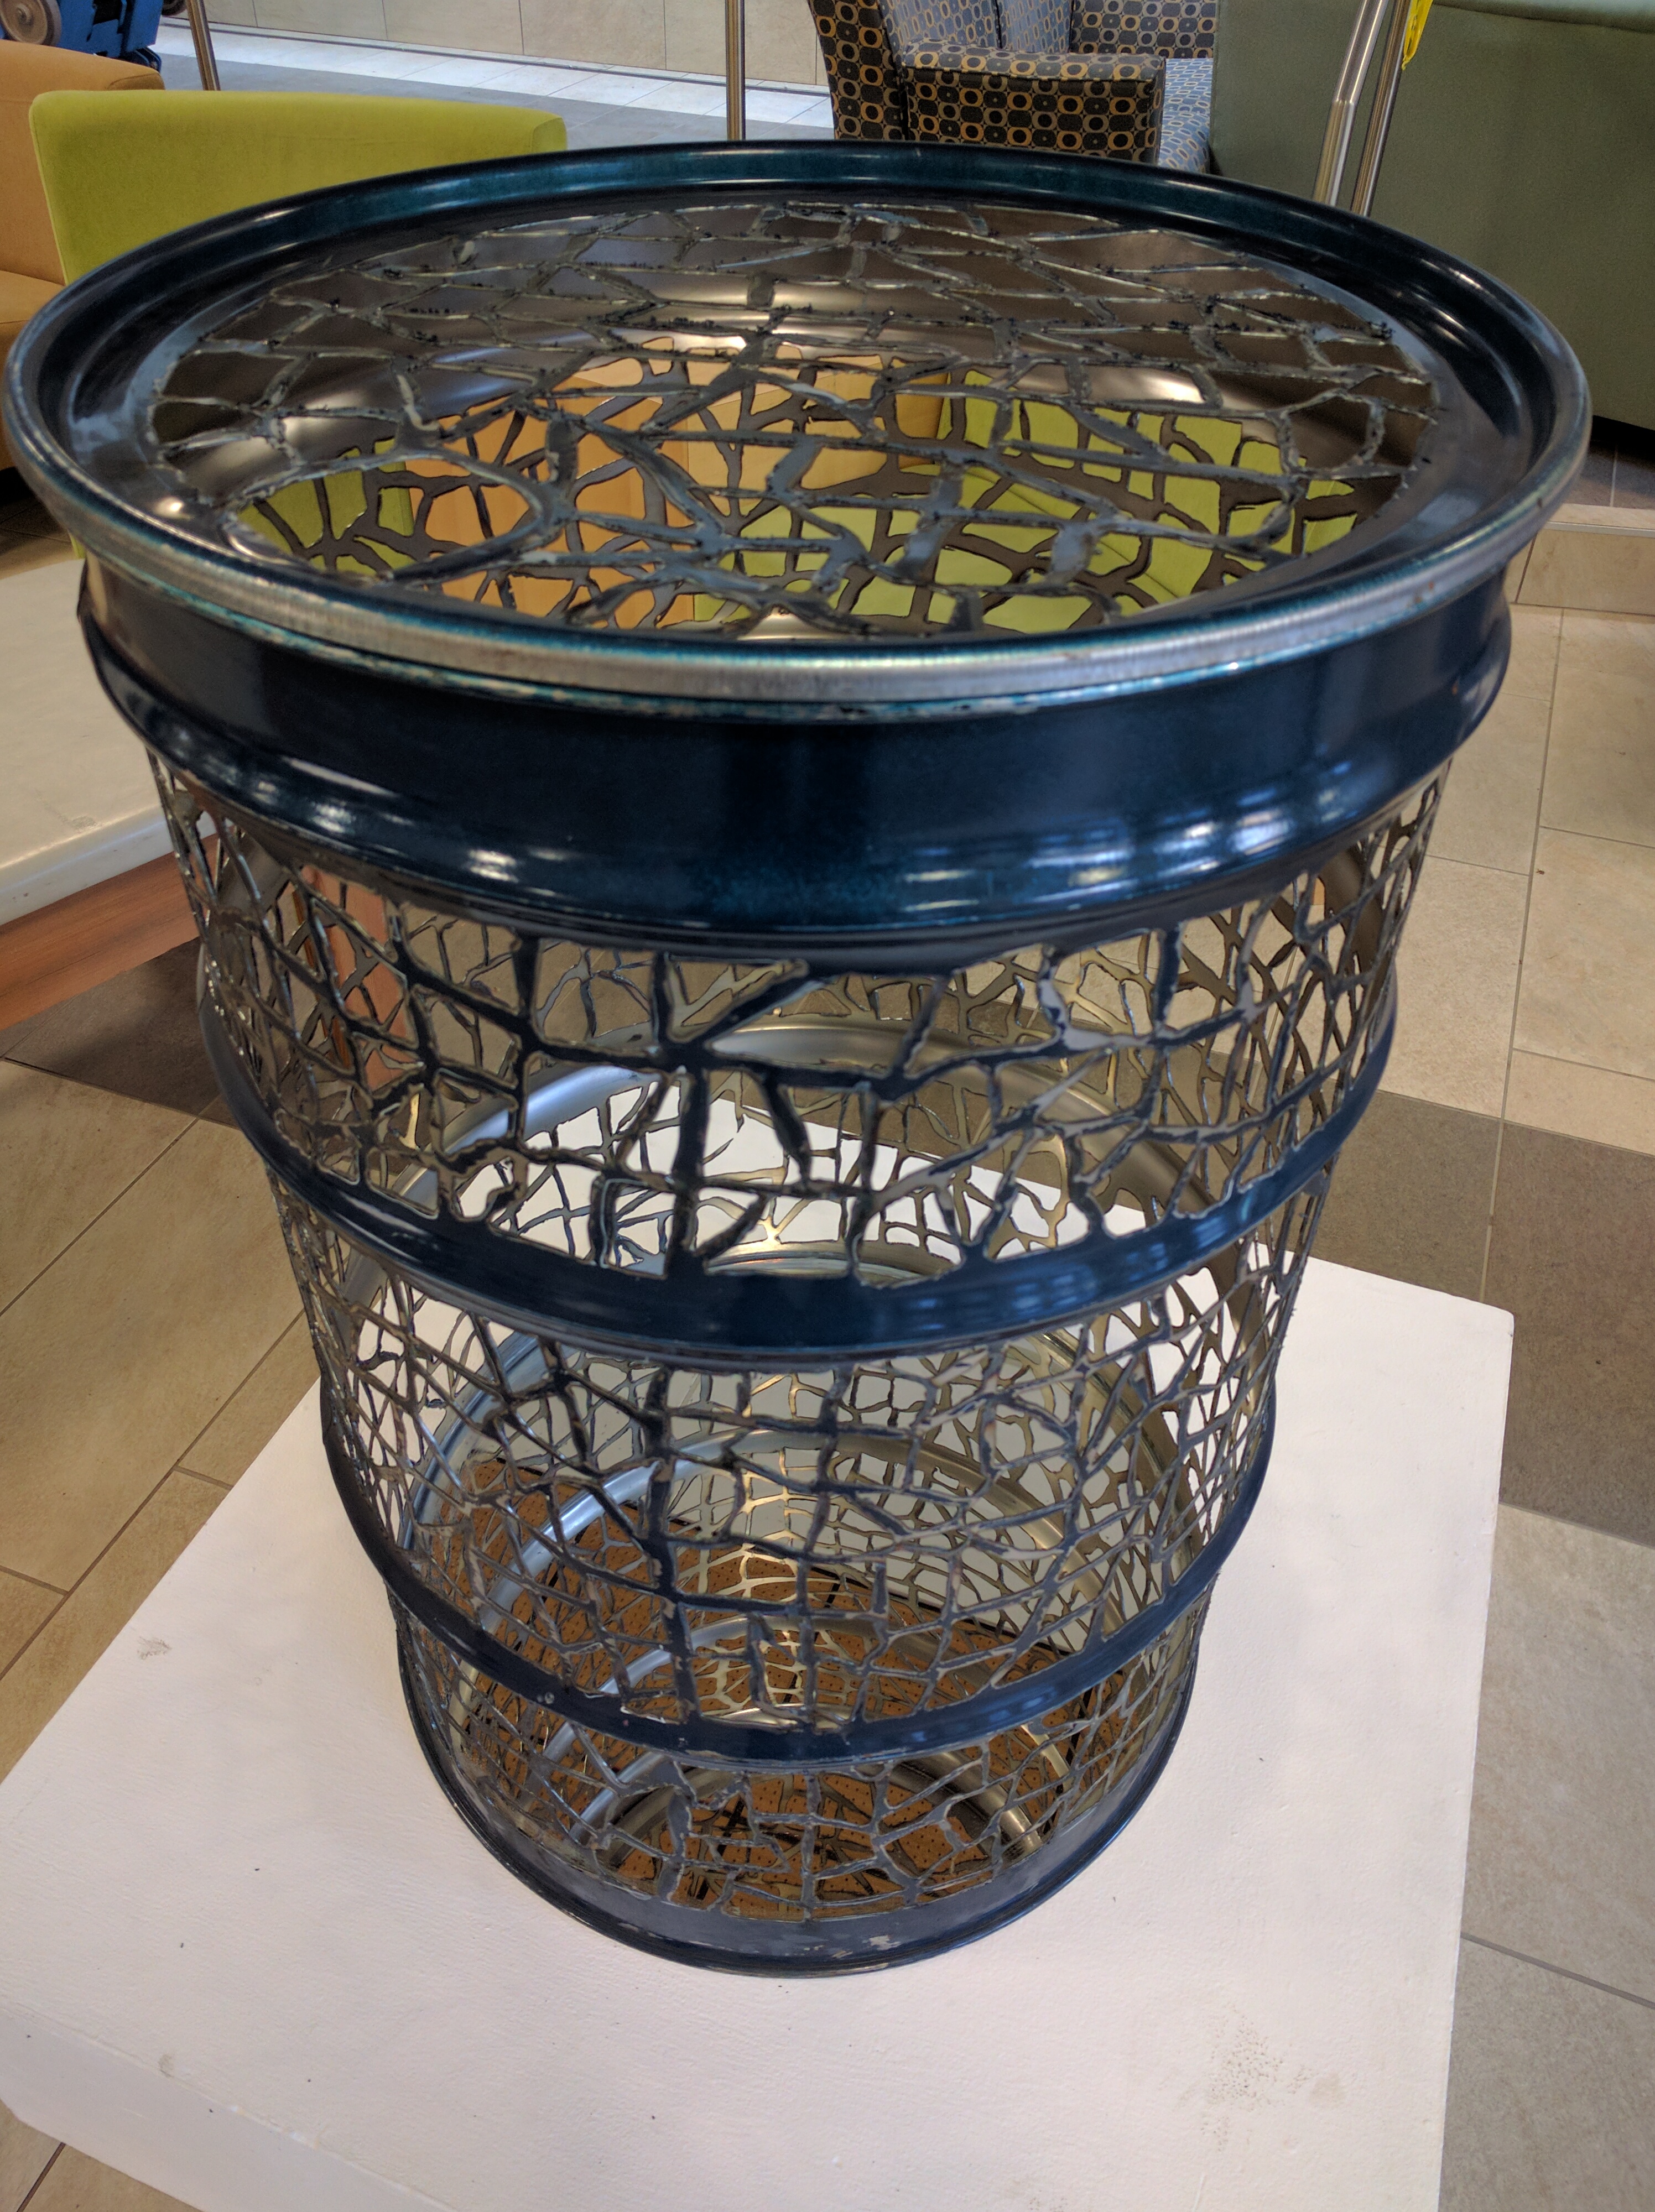 Dani Dale's plasma-cut drum barrel was one of the stunning projects featured in 2016's ART*Cycled.